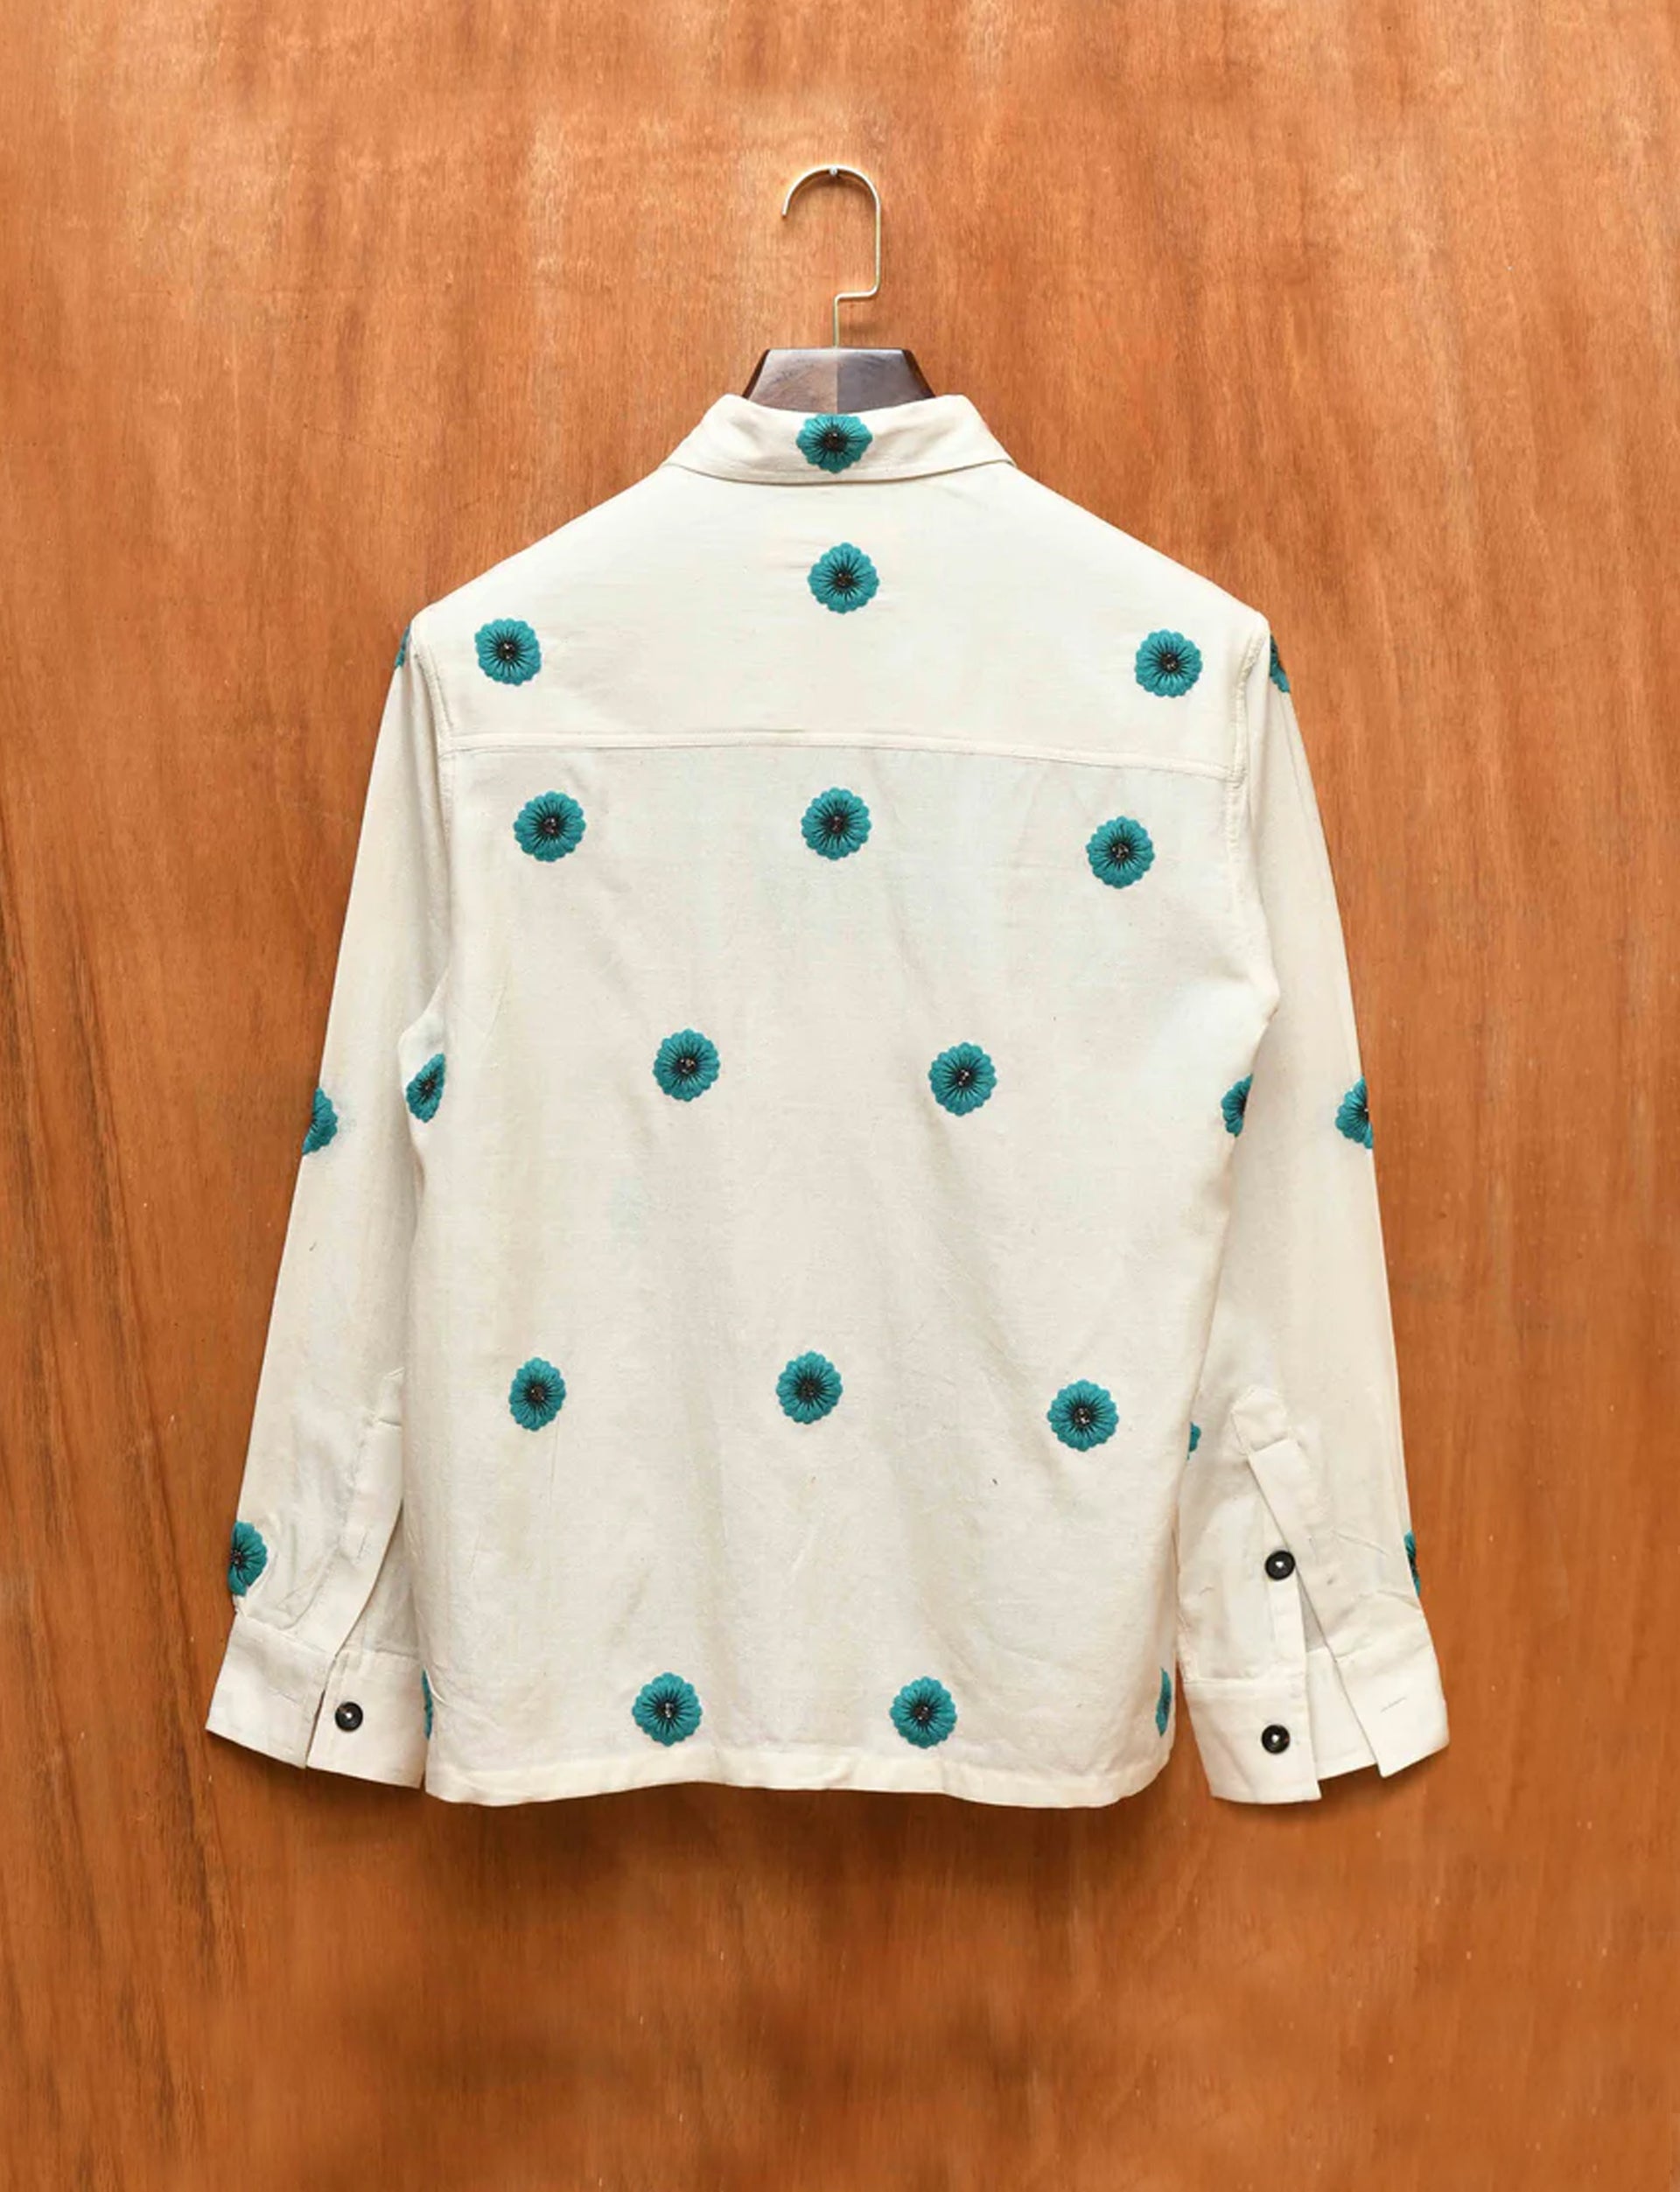 KARTIK RESEARCH SHIRT HAND EMBROIDERED TEAL FLOWERS